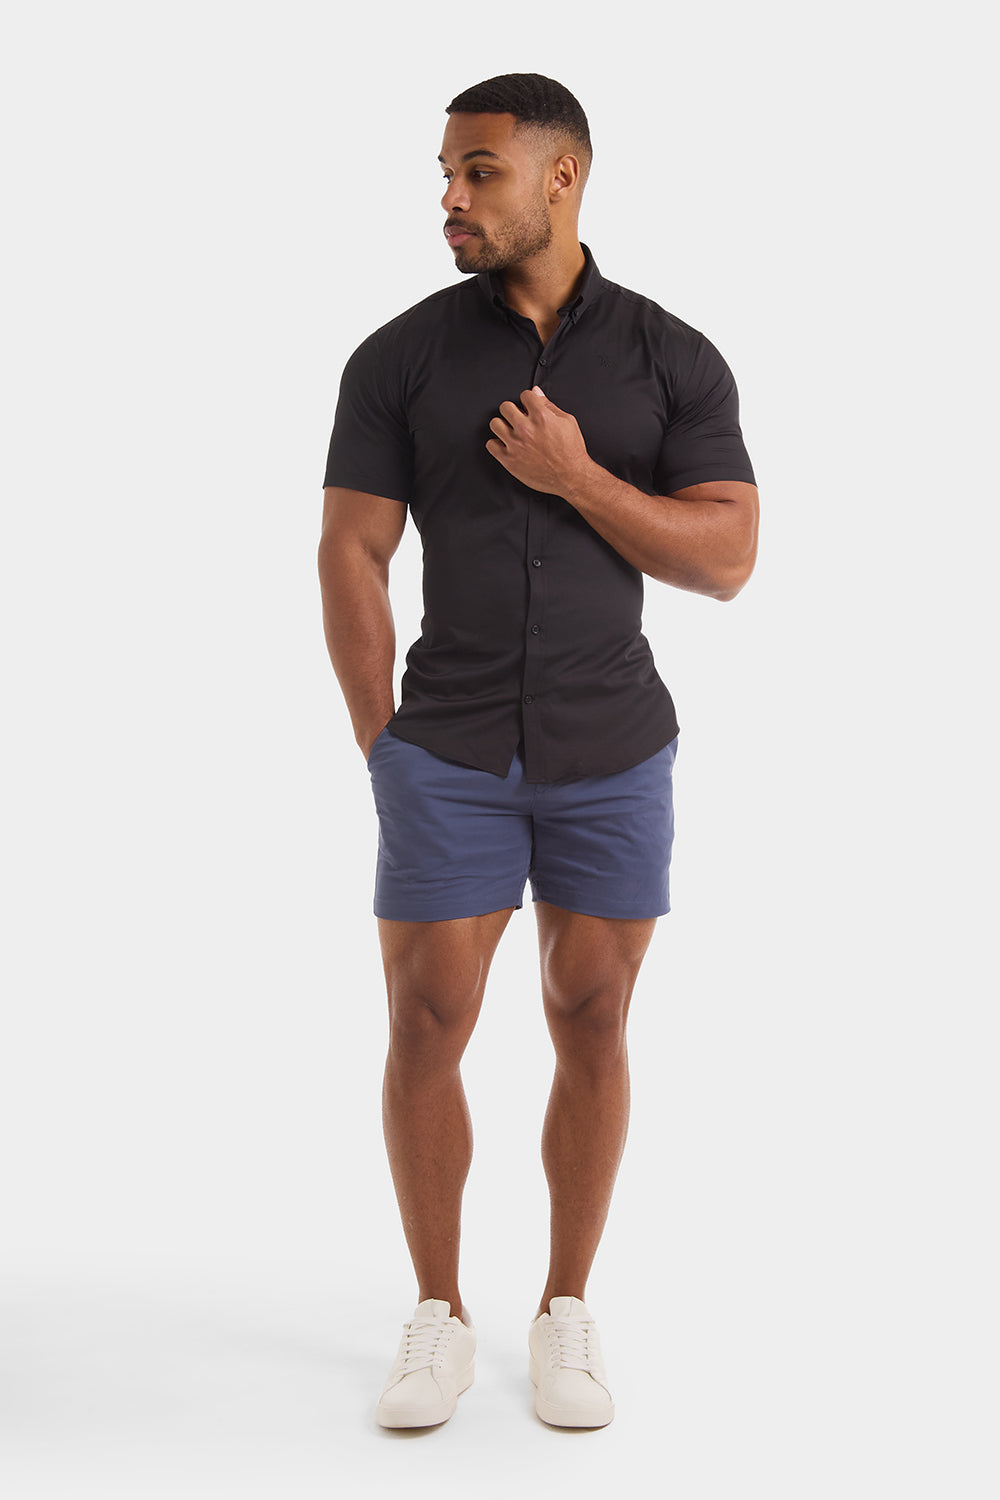 Muscle Fit Chino Shorts - Shorter Length in Airforce - TAILORED ATHLETE - ROW